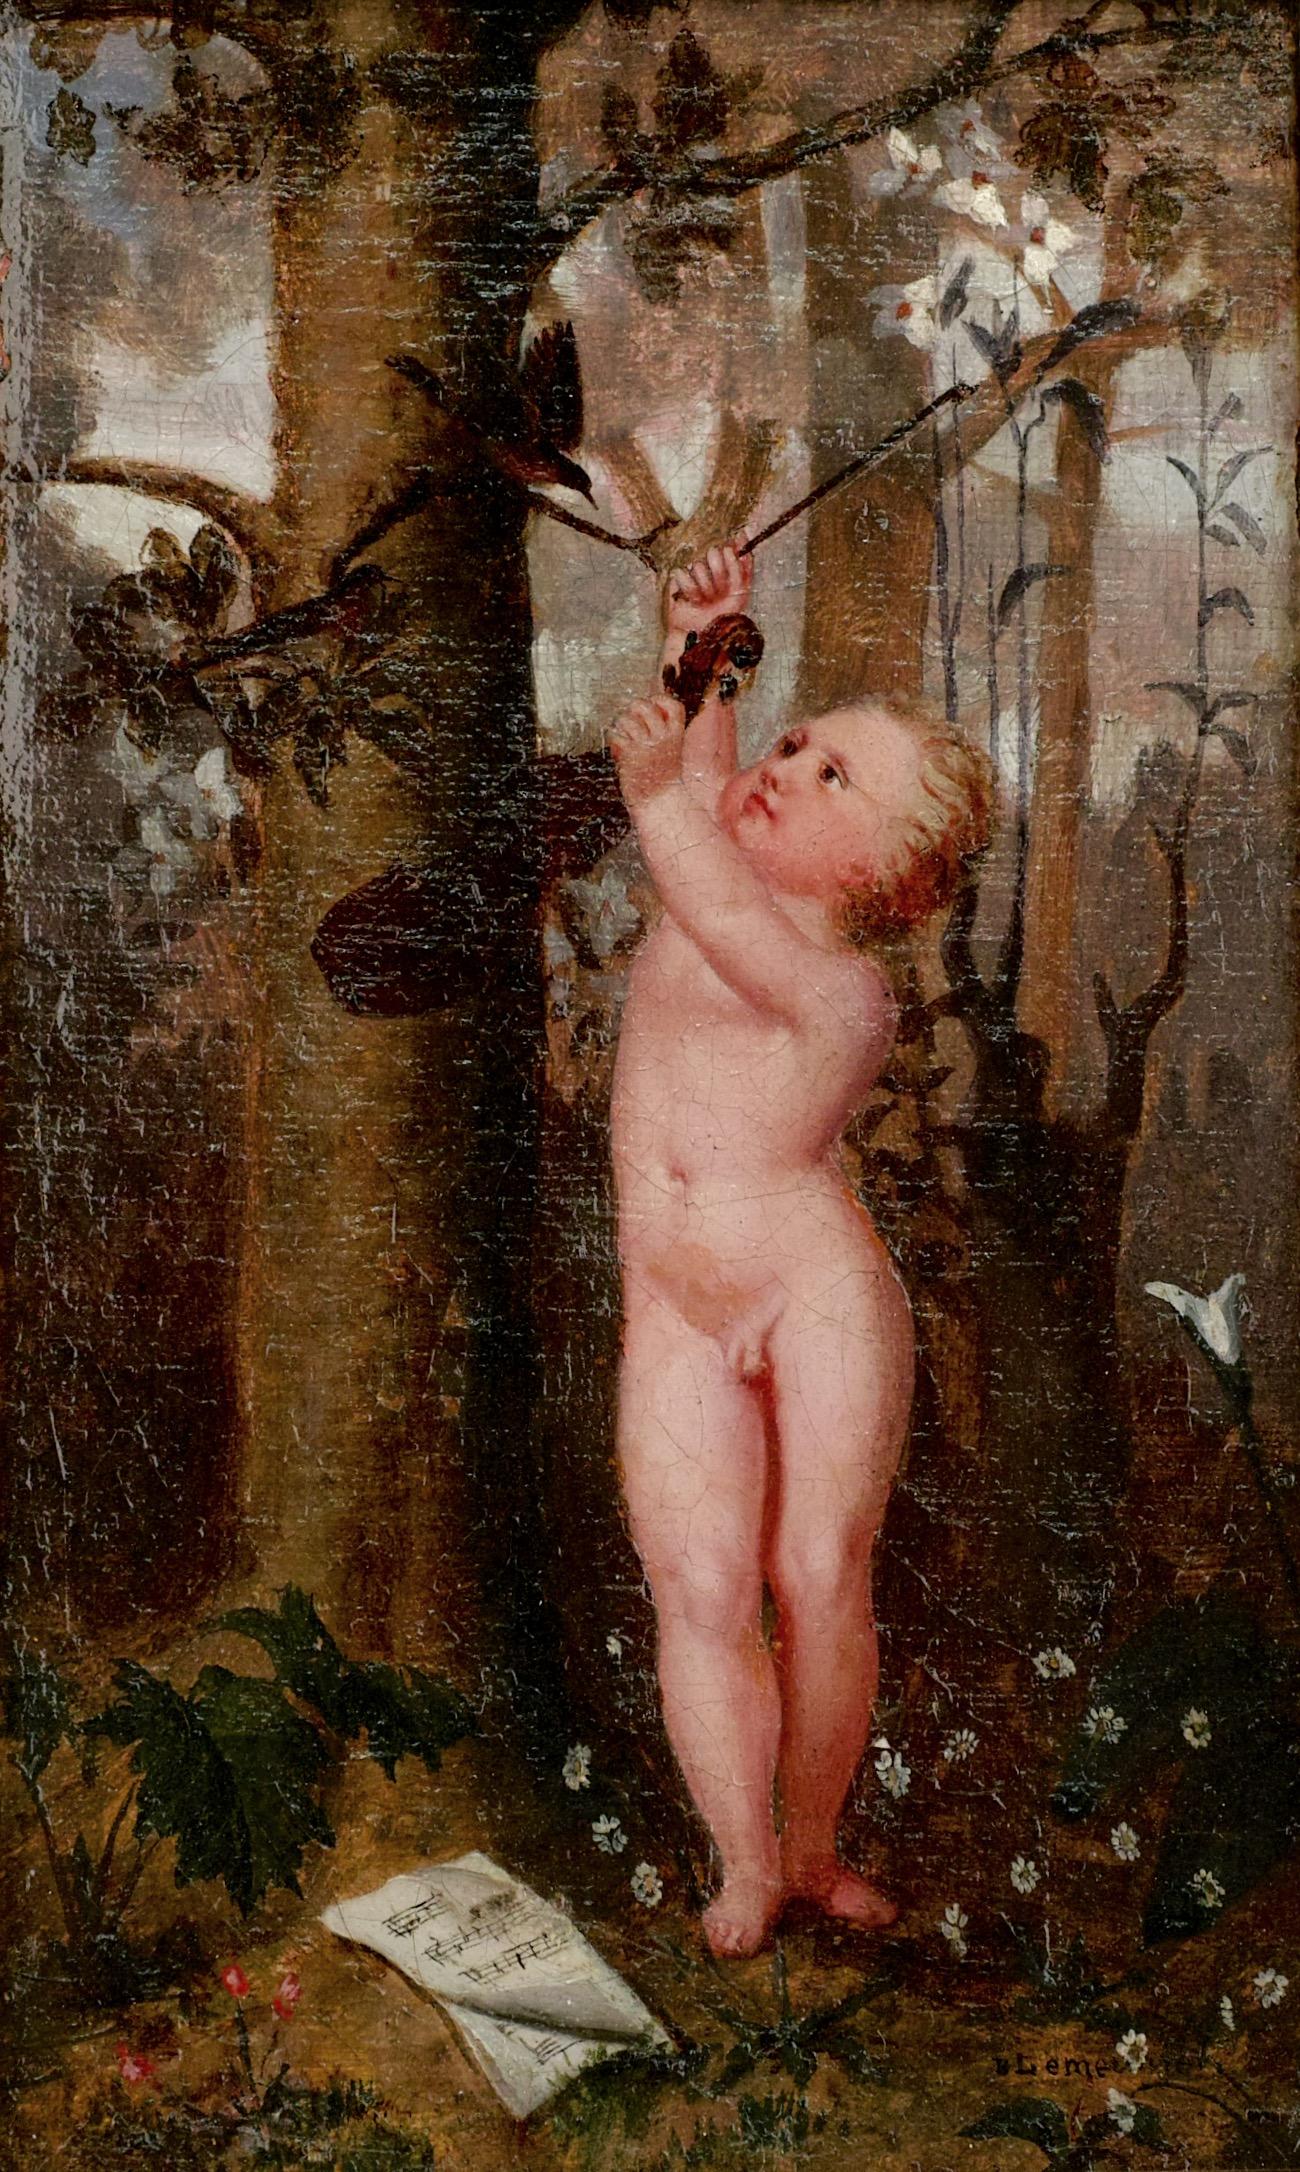 The Child Mozart, a Spirit of Music, Conducts the Starling with his bow - Painting by Basile Lemeunier